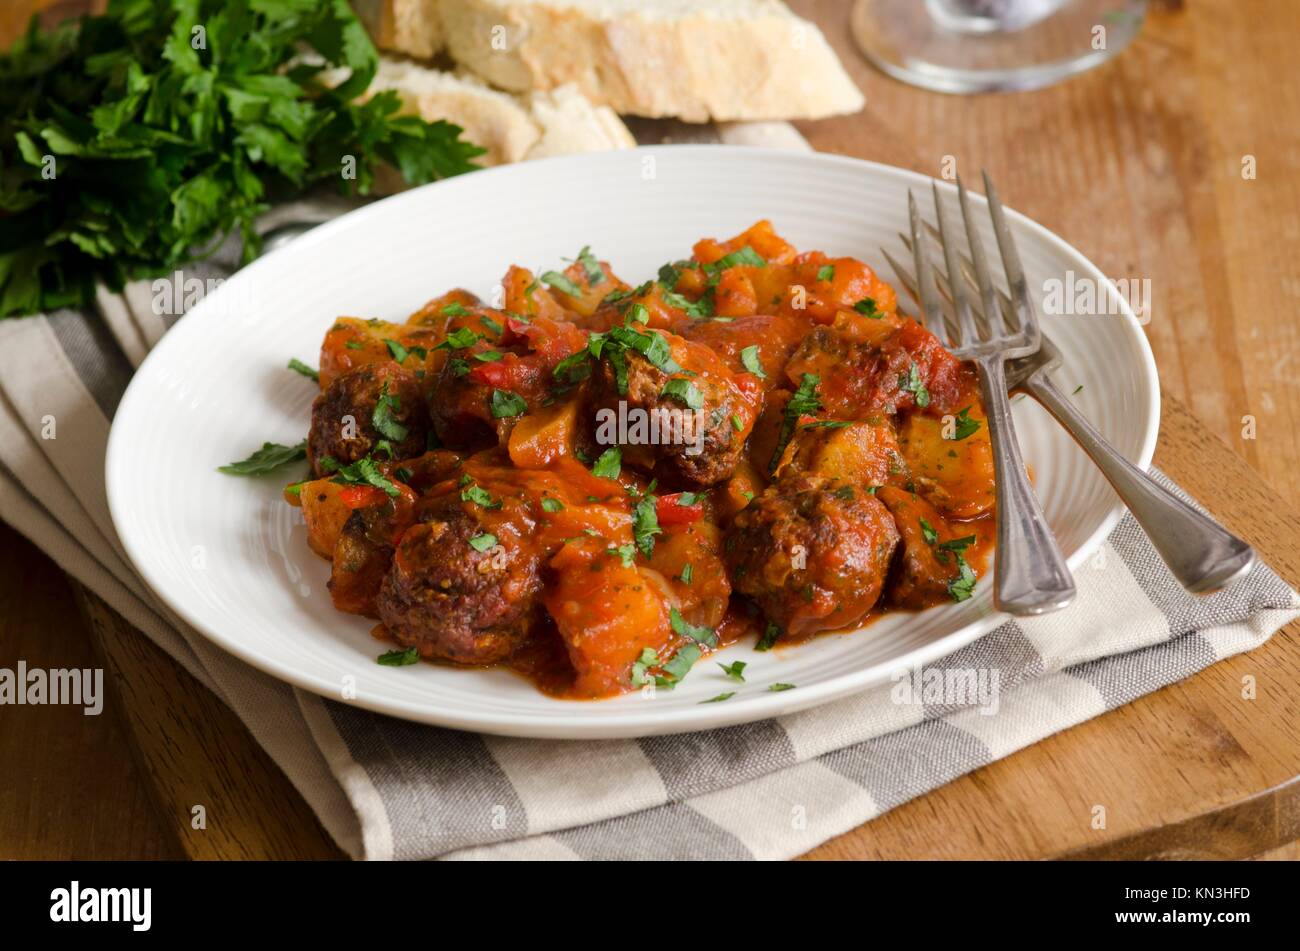 Meatballs Albondigas with potatoes and roast vegetables on a plate. Stock Photo